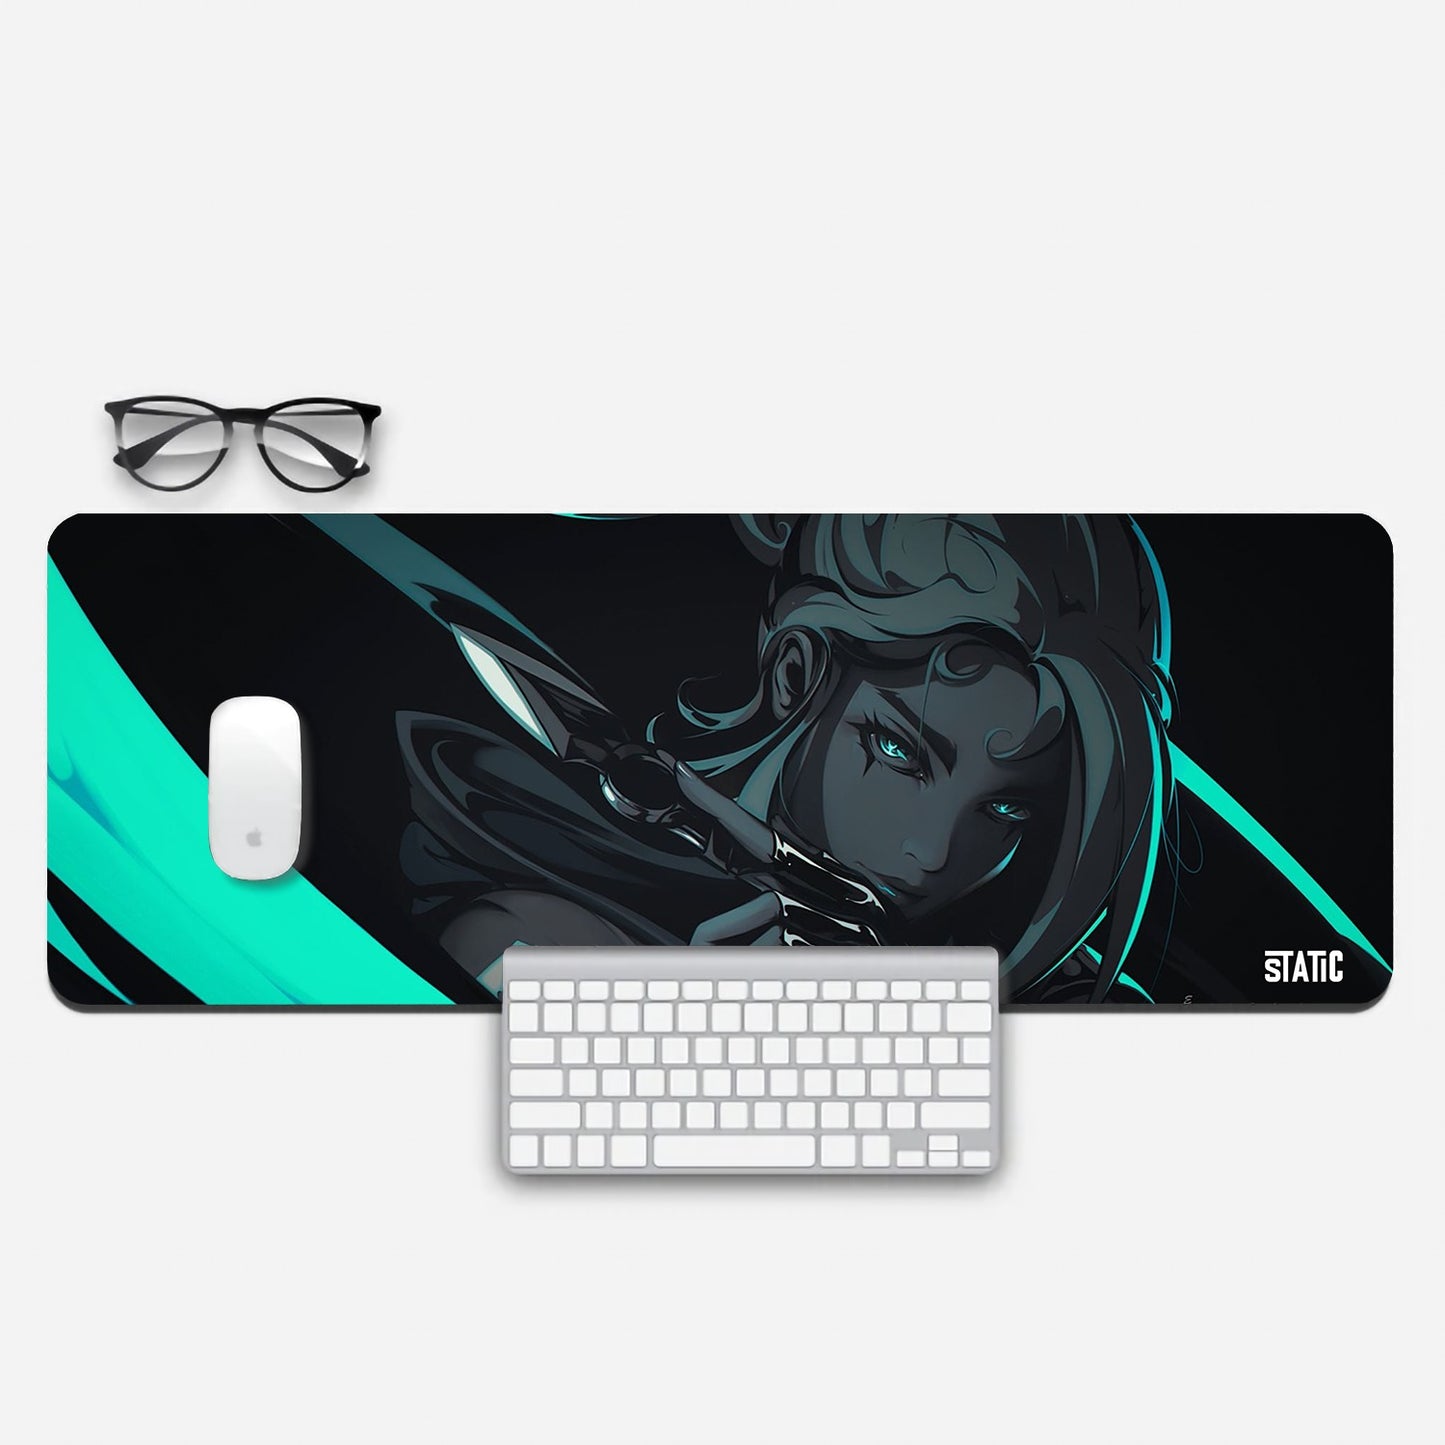 Elevate your gaming experience with our Extended Gaming Mouse Pad featuring Jett from Valorant. This pad showcases Jett's precision amidst a turquoise haze, her gleaming knife ready for action. Measuring 800x300mm, it offers ample room for precise control. Crafted with top-quality materials, it ensures durability during intense gaming sessions. Whether you're a casual gamer or a competitive pro, this mouse pad enhances performance while adding Valorant flair to your setup. Elevate your game with Jett today!